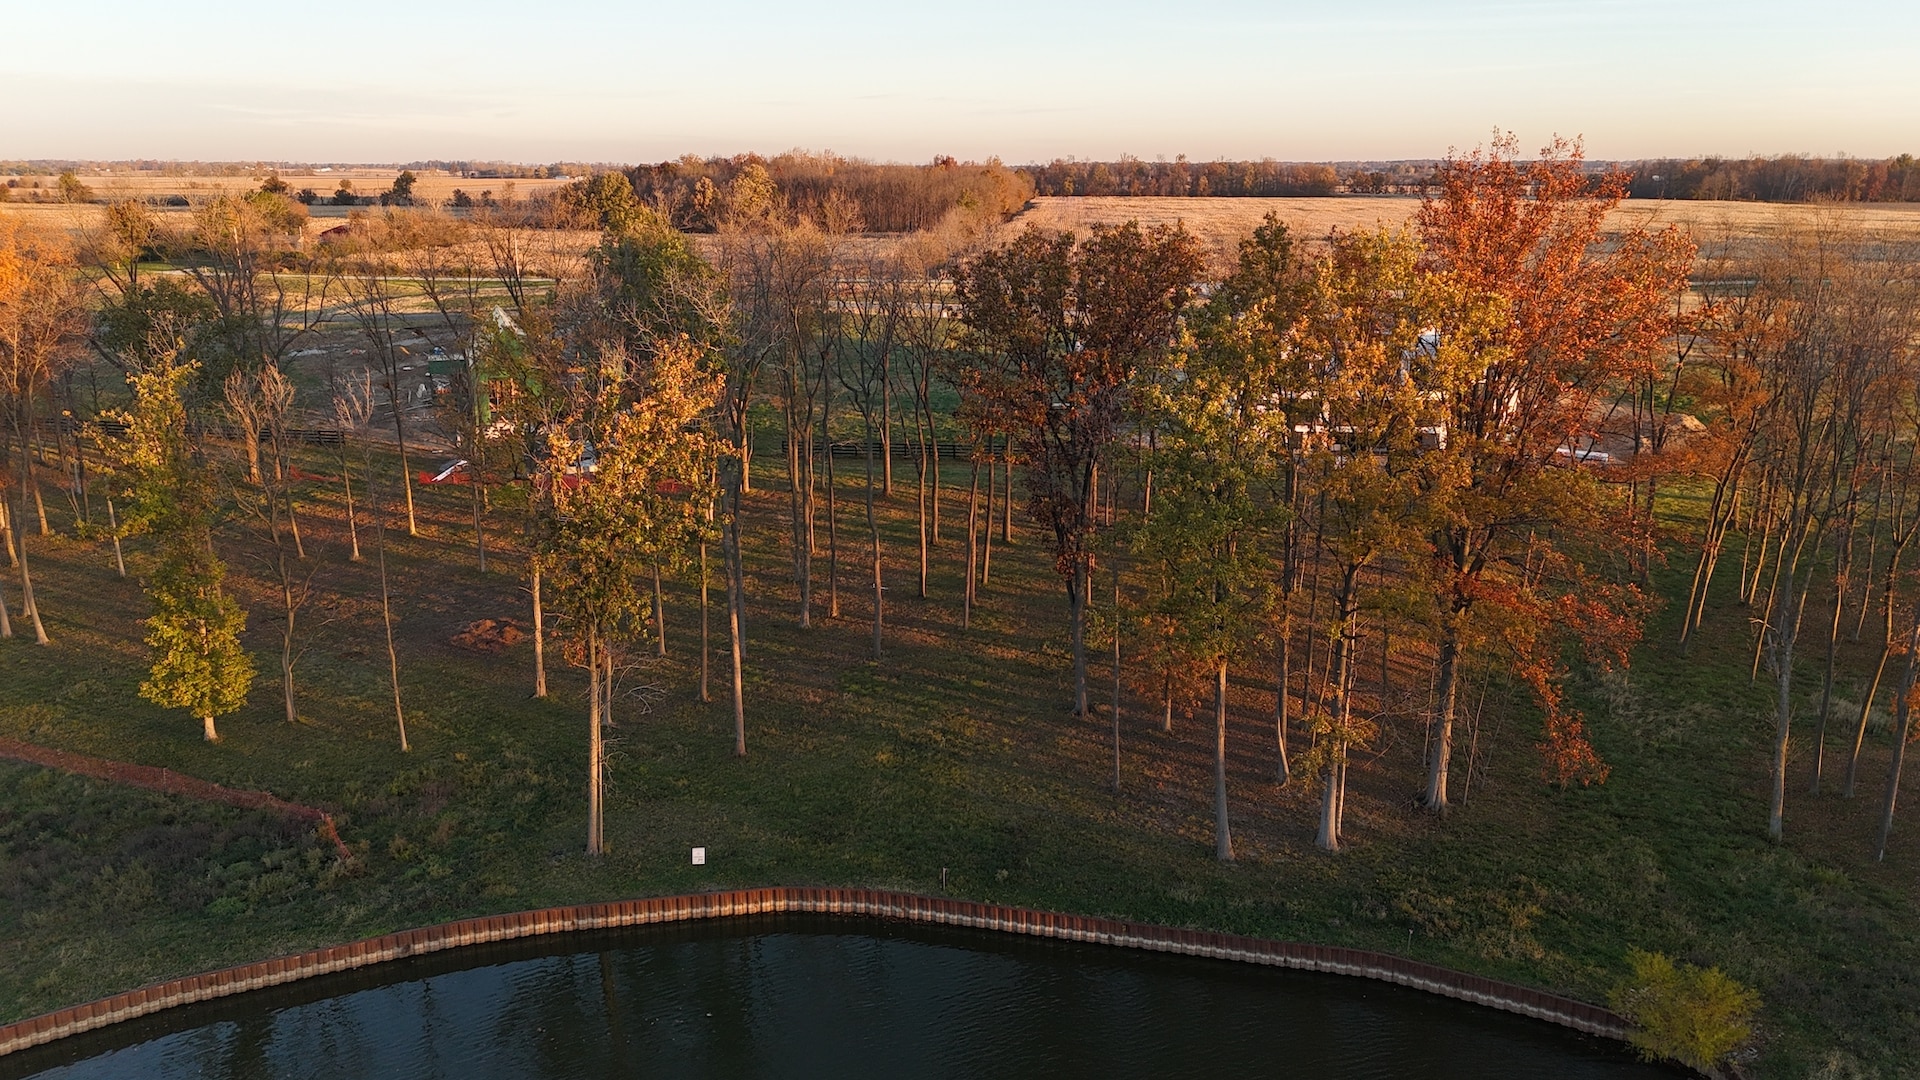 An aerial view of a field with trees and a pond, surrounded by nature's beauty.